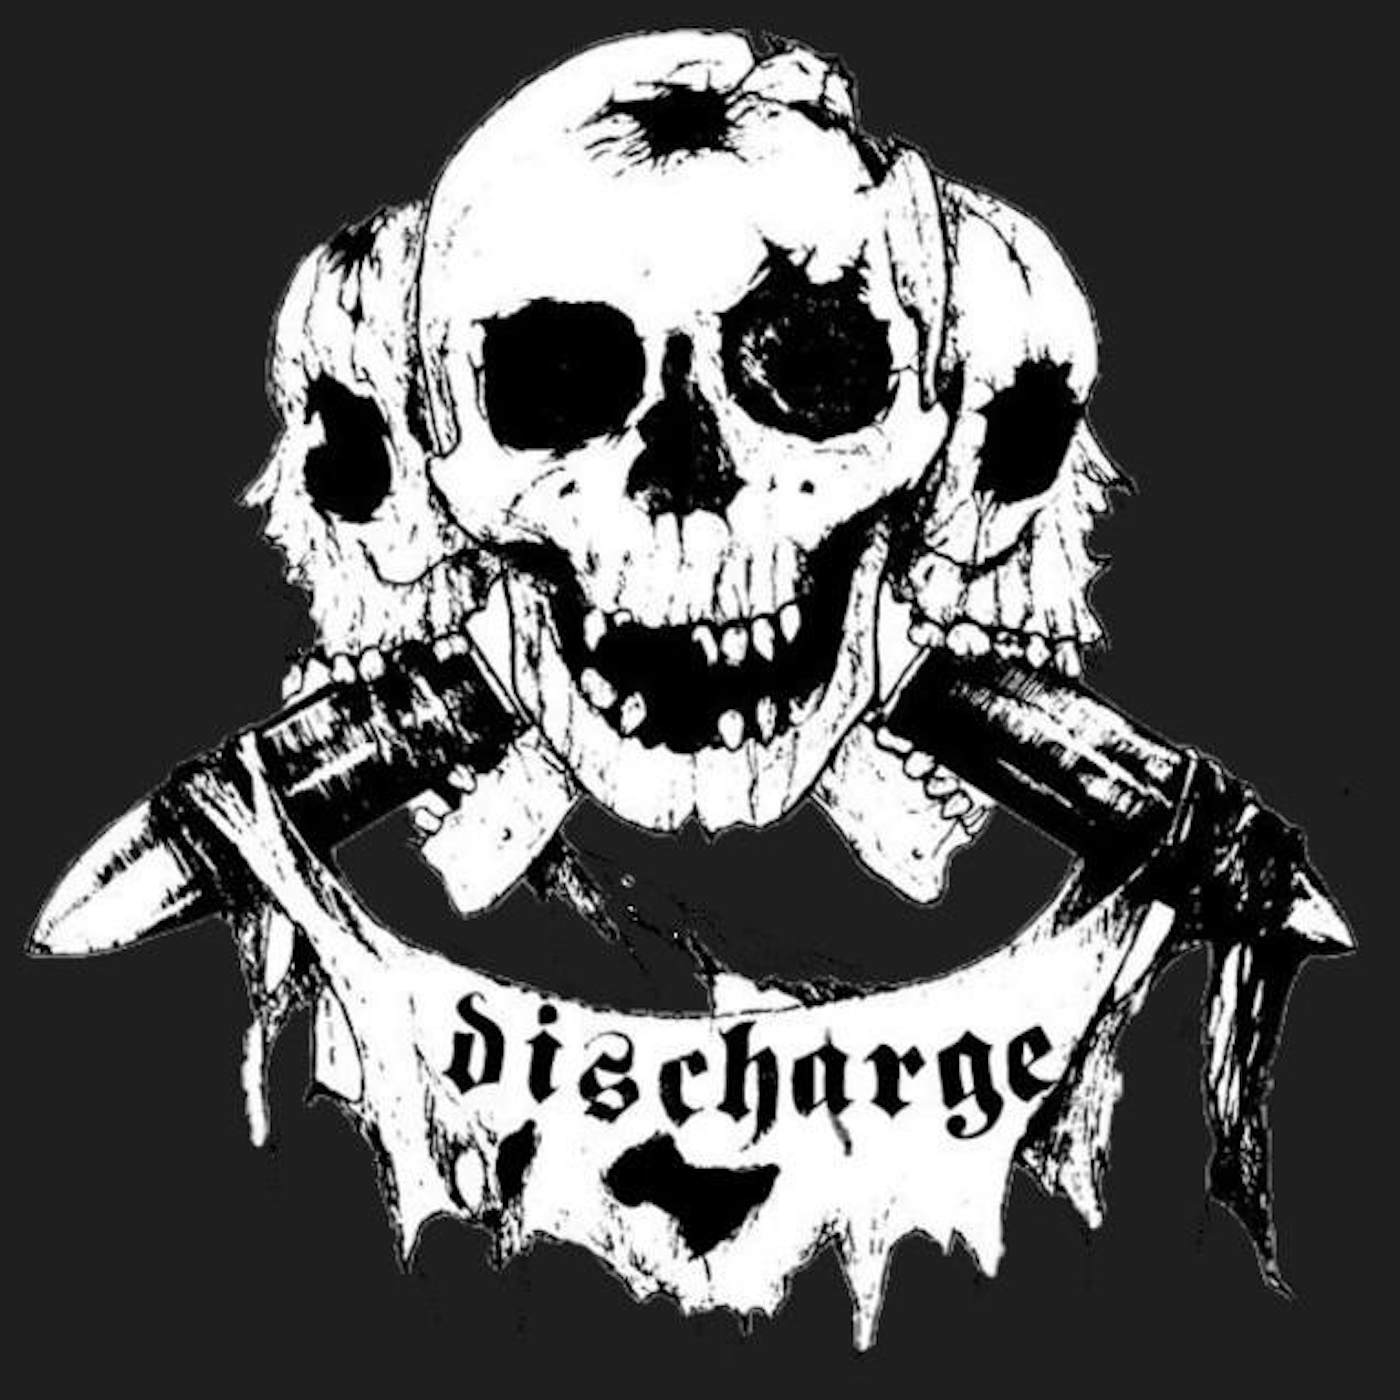 Discharge T Shirt - The More I See